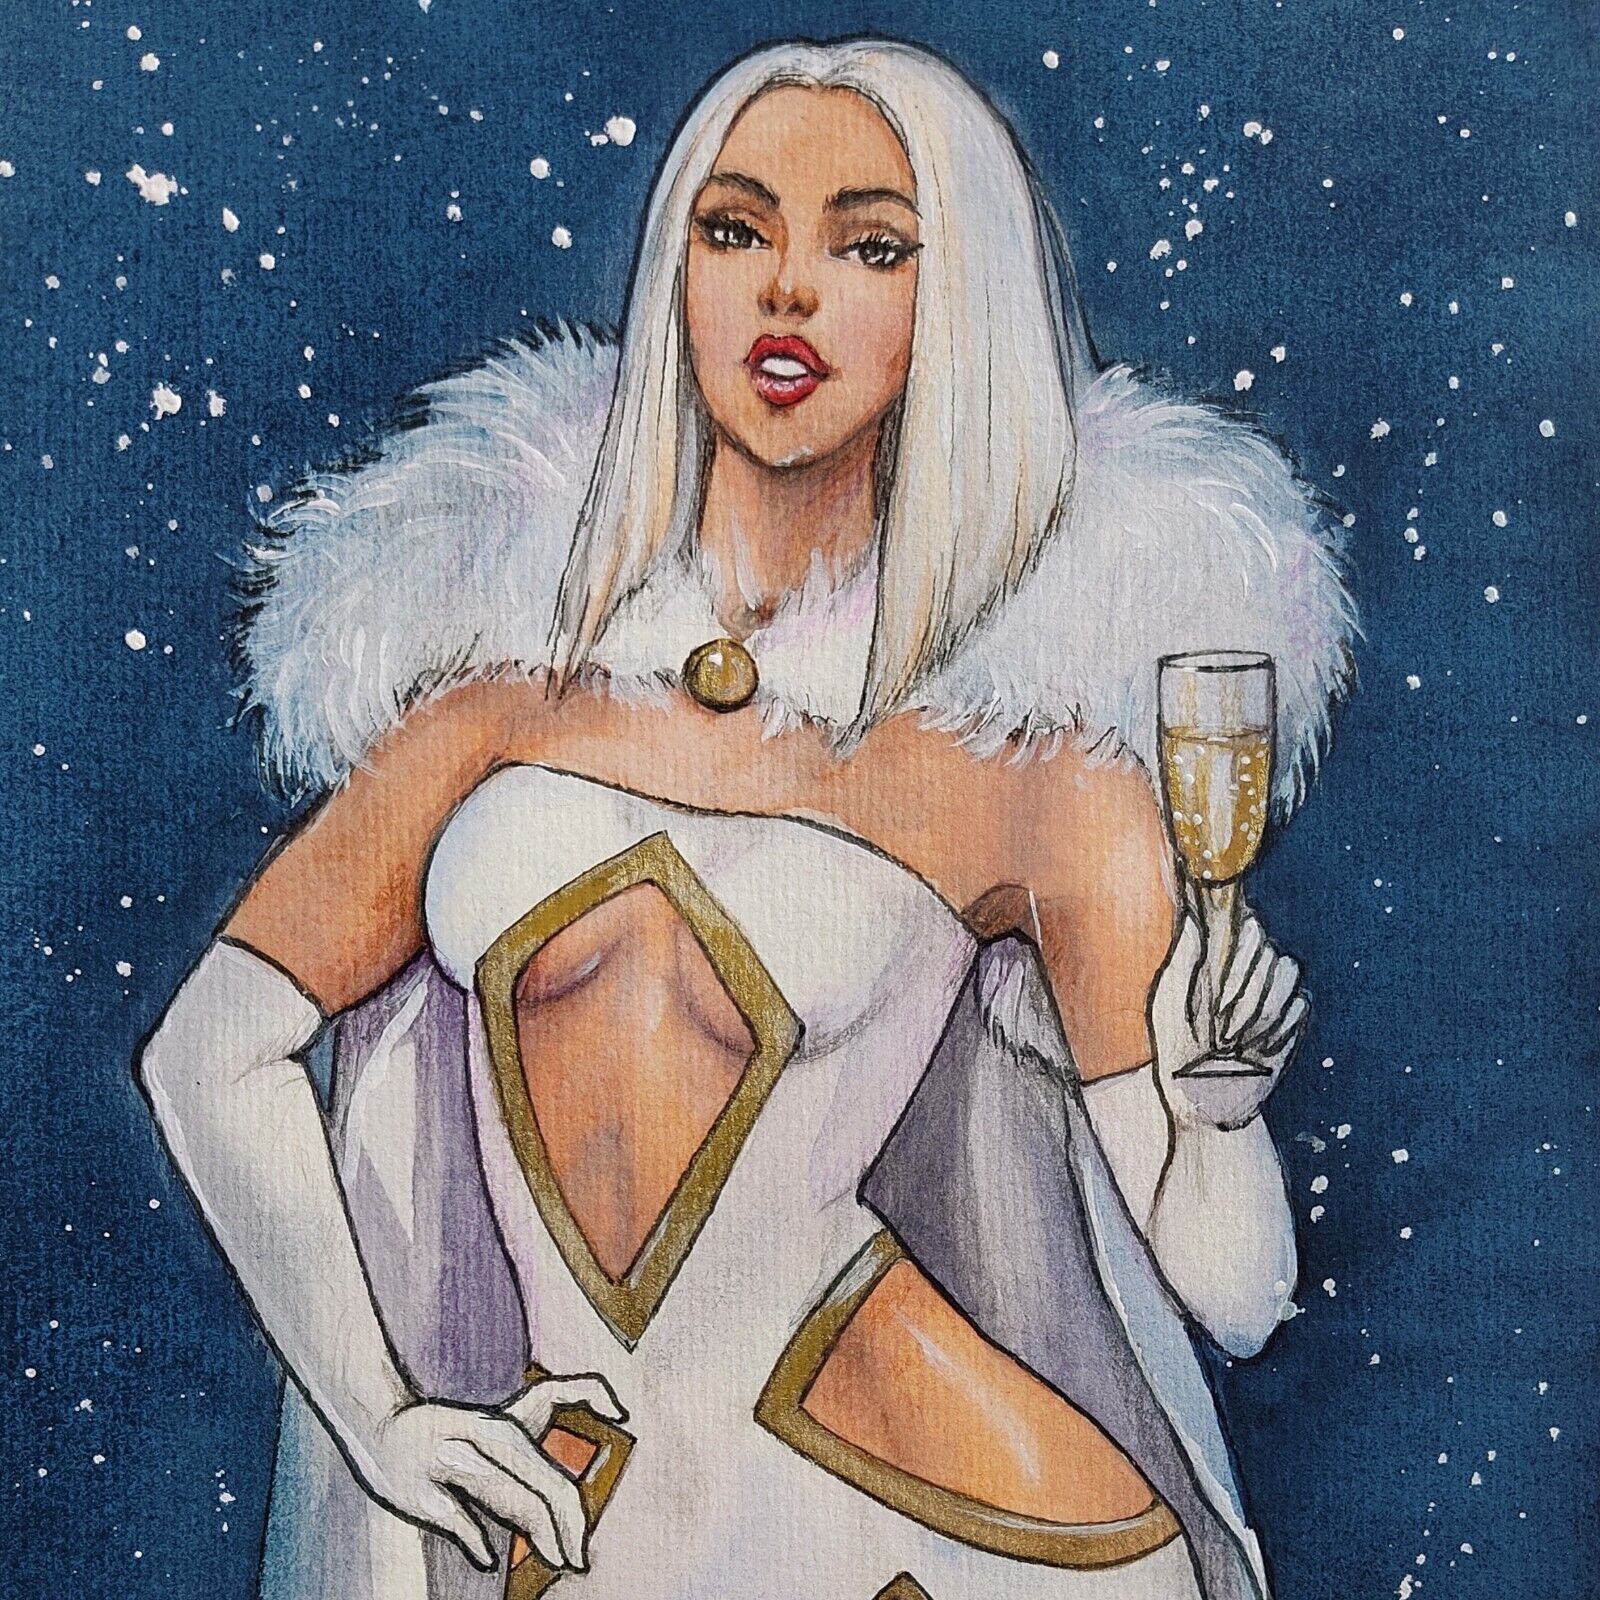 Sexy Emma Frost (8x12/A4) Original Art Painting Pinup by Sheludchenko